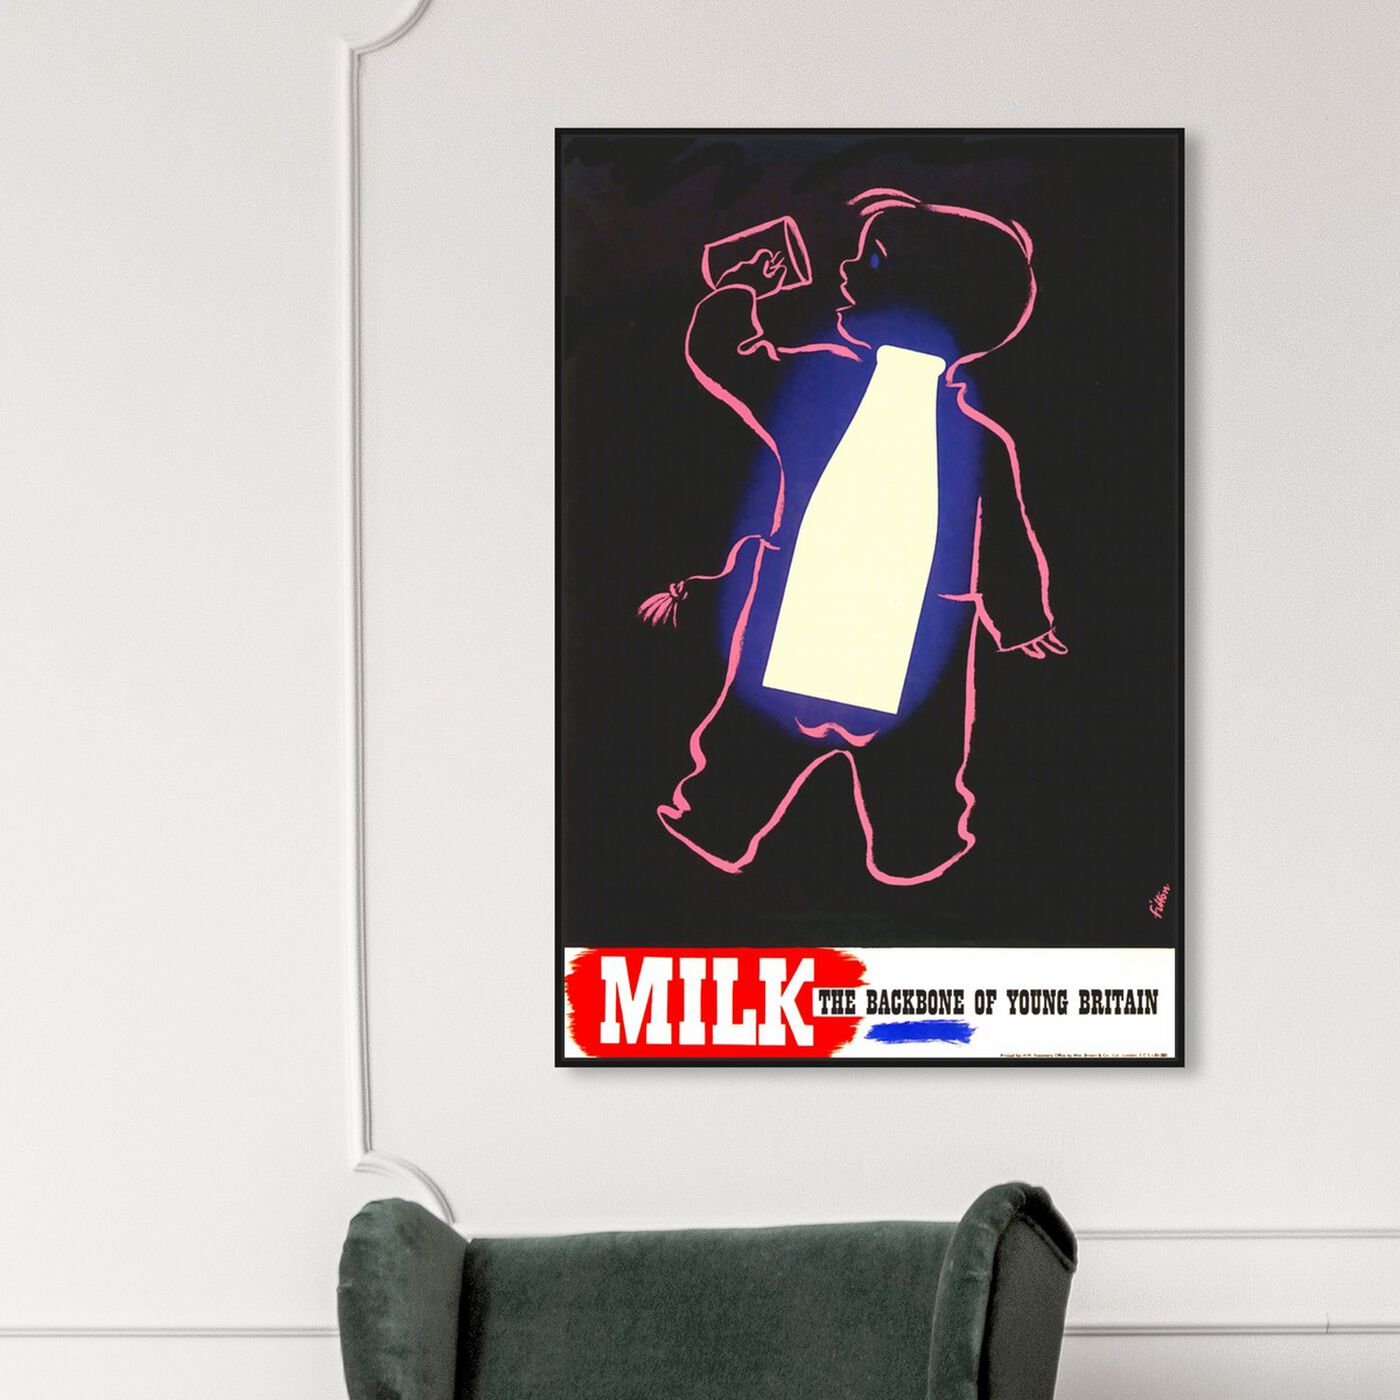 Hanging view of Milk featuring advertising and posters art.